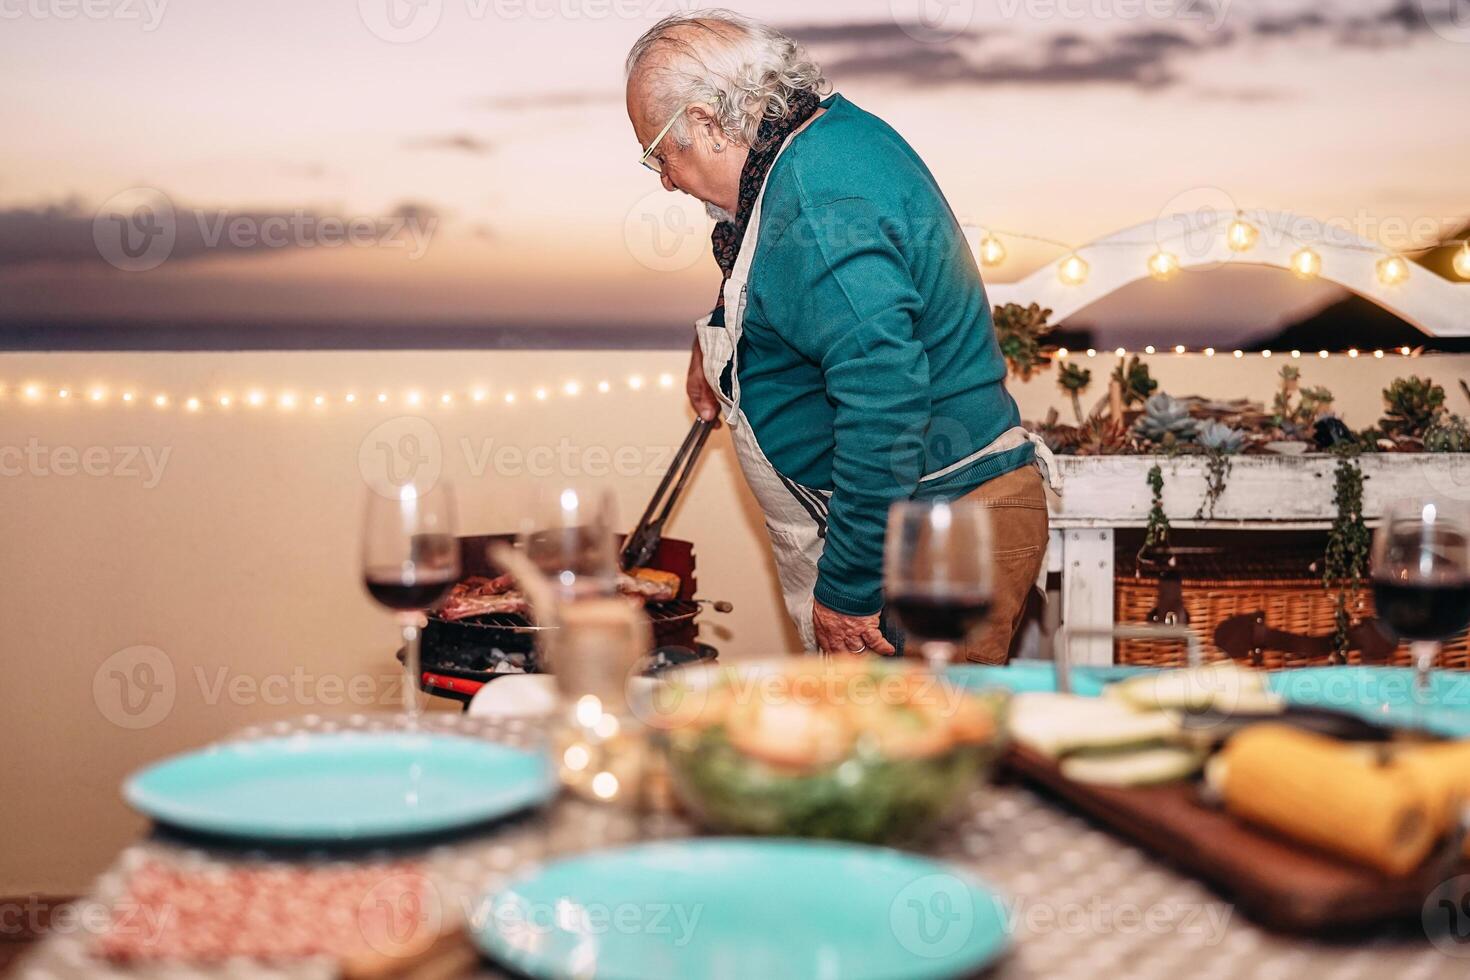 Senior man grilling meat at barbecue dinner on terrace - Grandfather cookin for his family on rooftop - Concept of dining bbq and eating together outdoor photo